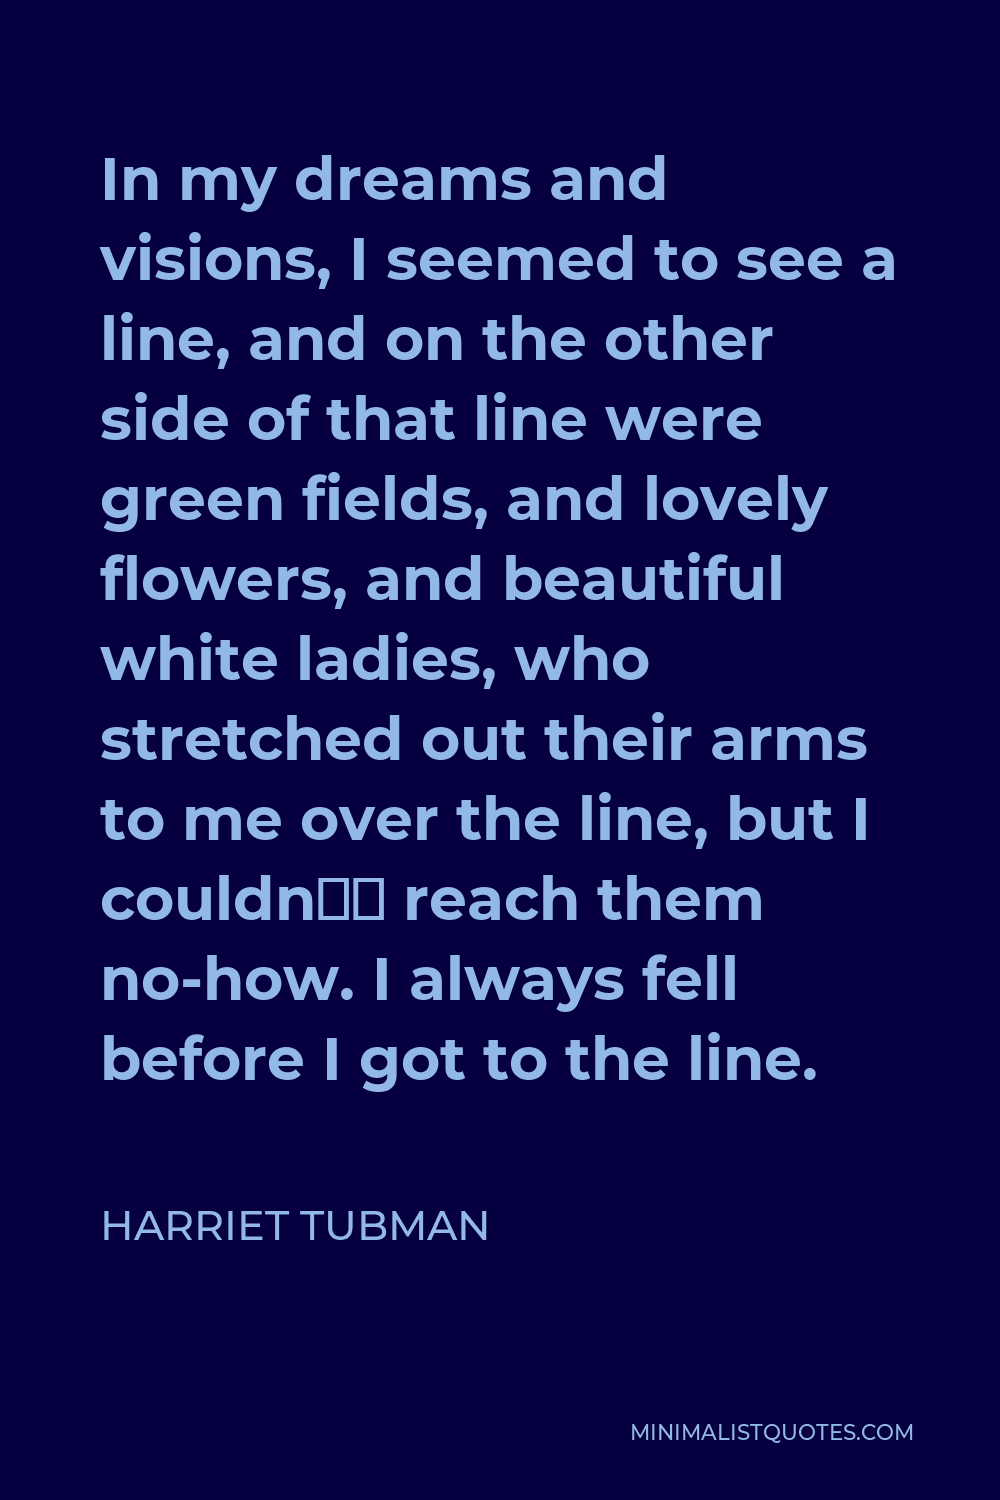 Harriet Tubman Quote In My Dreams And Visions I Seemed To See A Line And On The Other Side Of That Line Were Green Fields And Lovely Flowers And Beautiful White Ladies